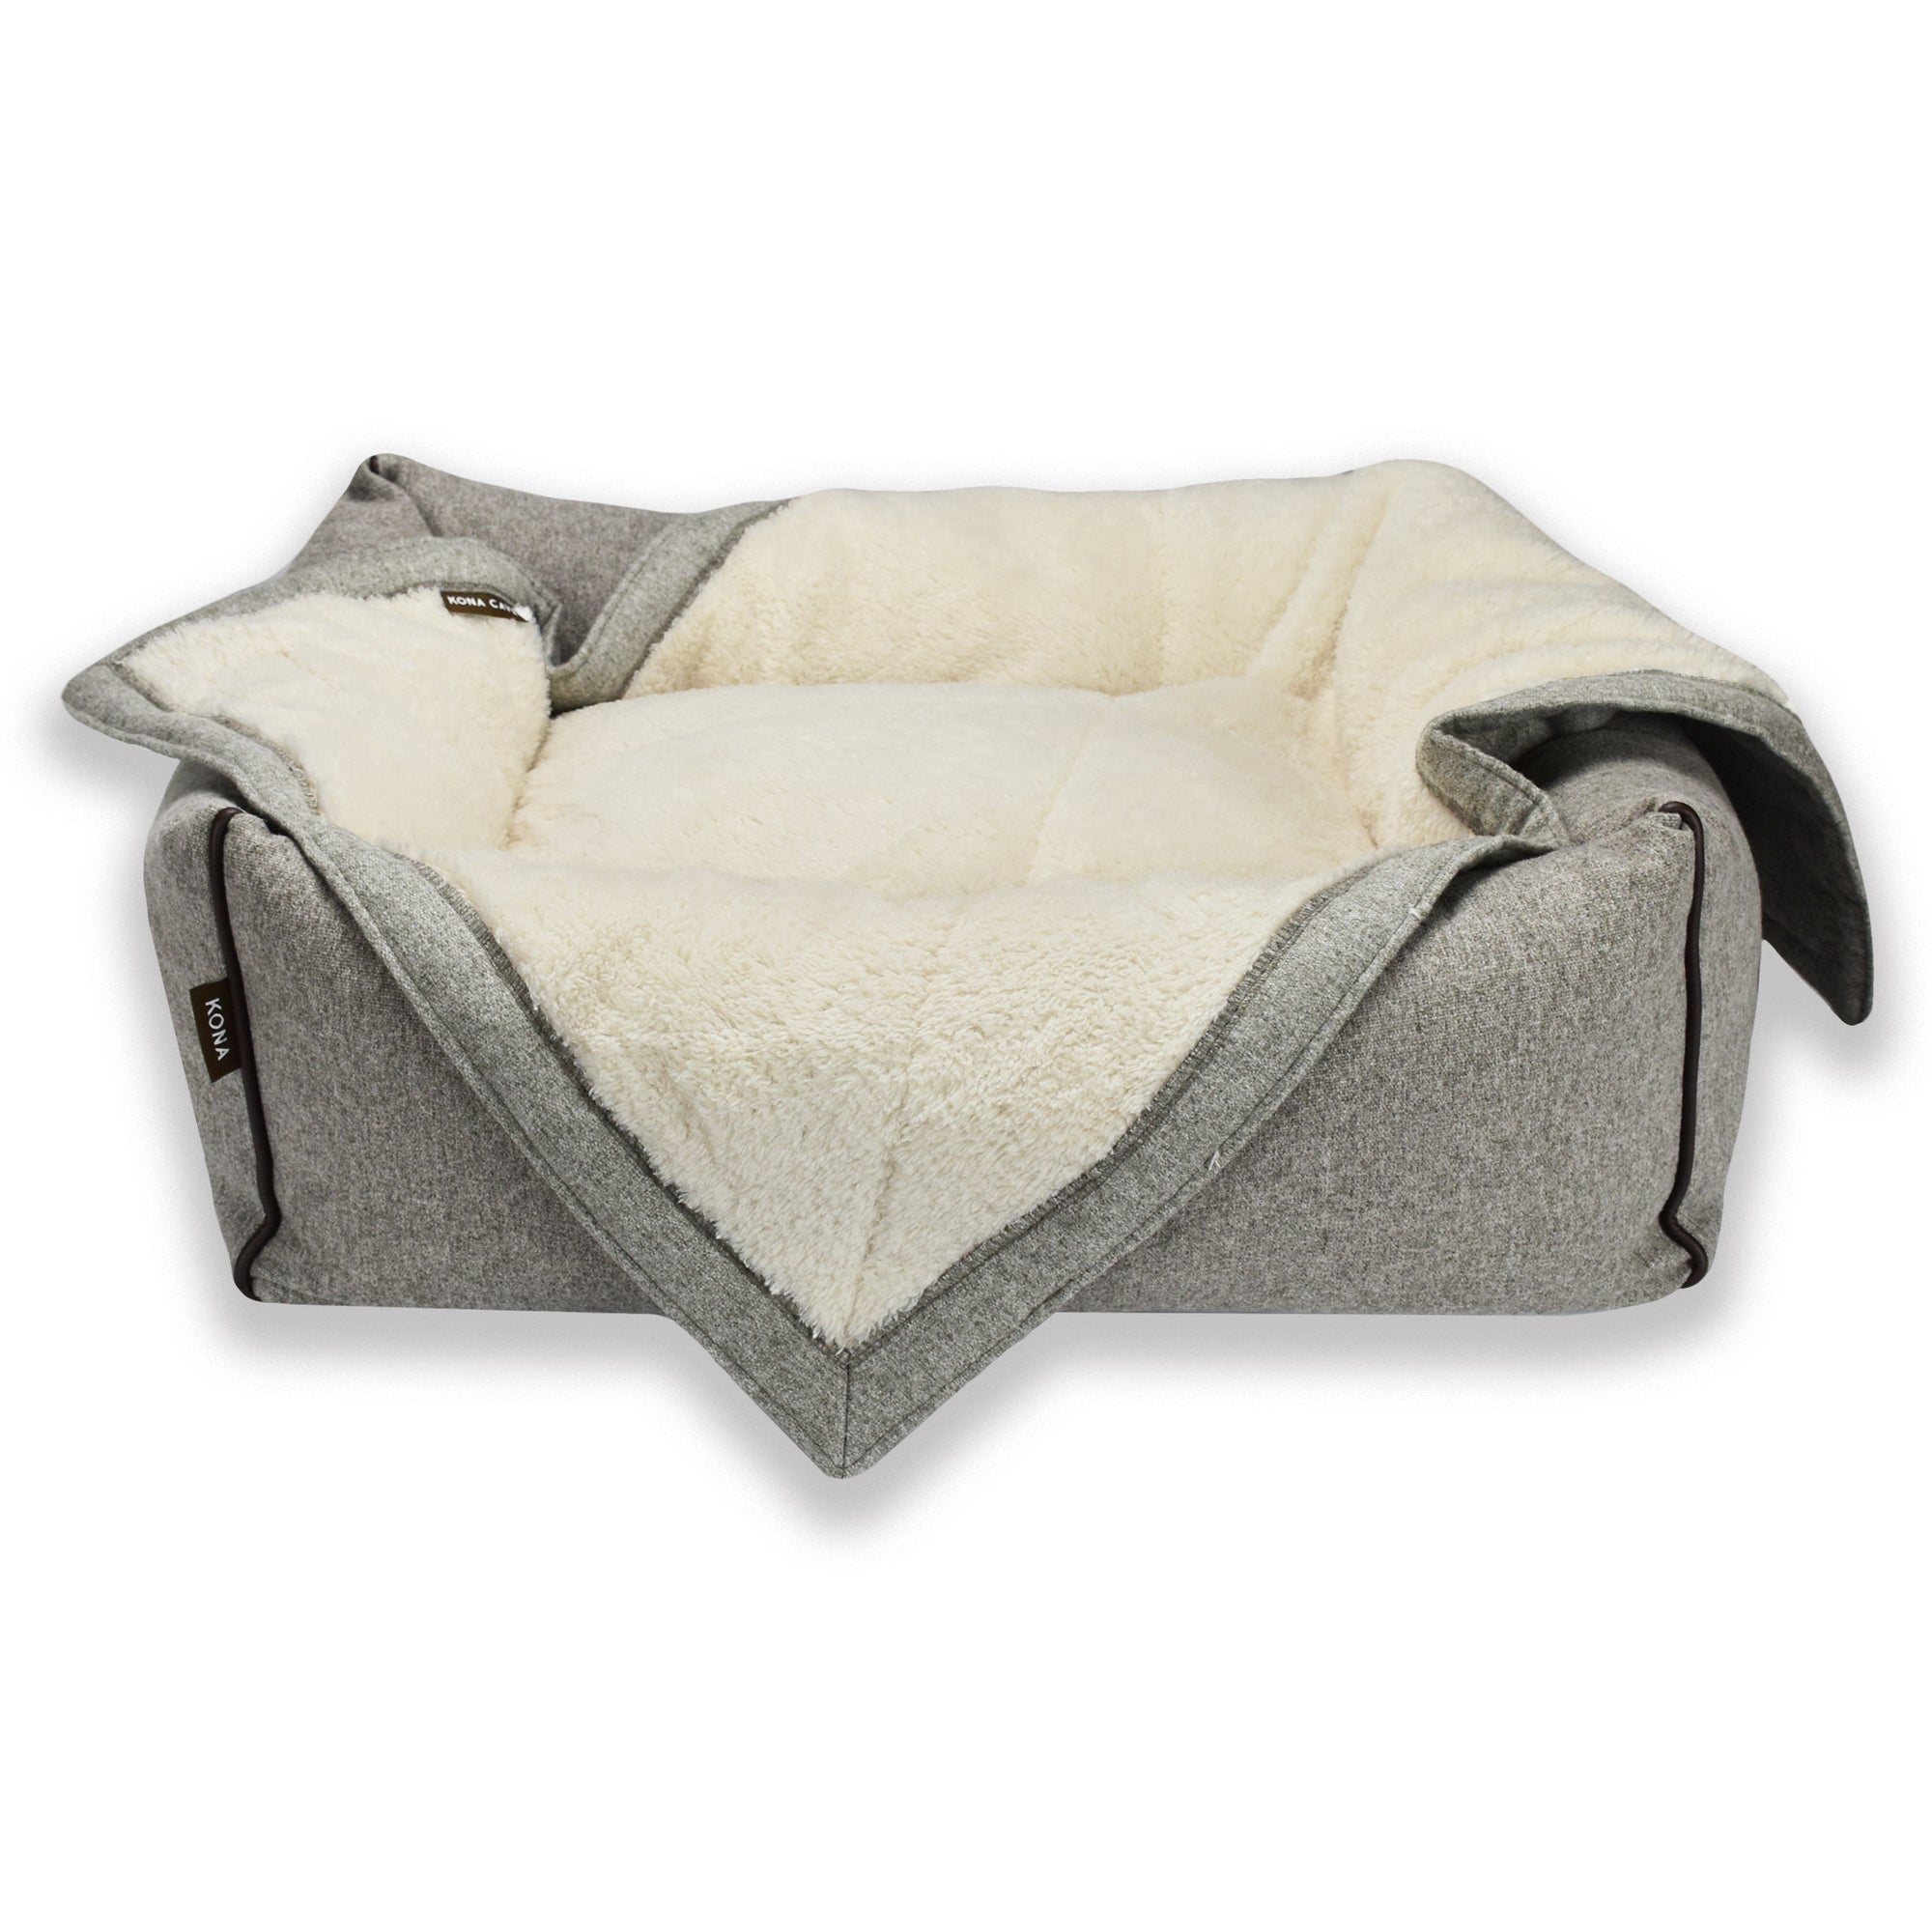 KONA CAVE® Grey Flannel Pet Blanket with Grey Flannel Bolster Bed in small - add extra warmth and cosy-ness to your dog's bed in the cooler months